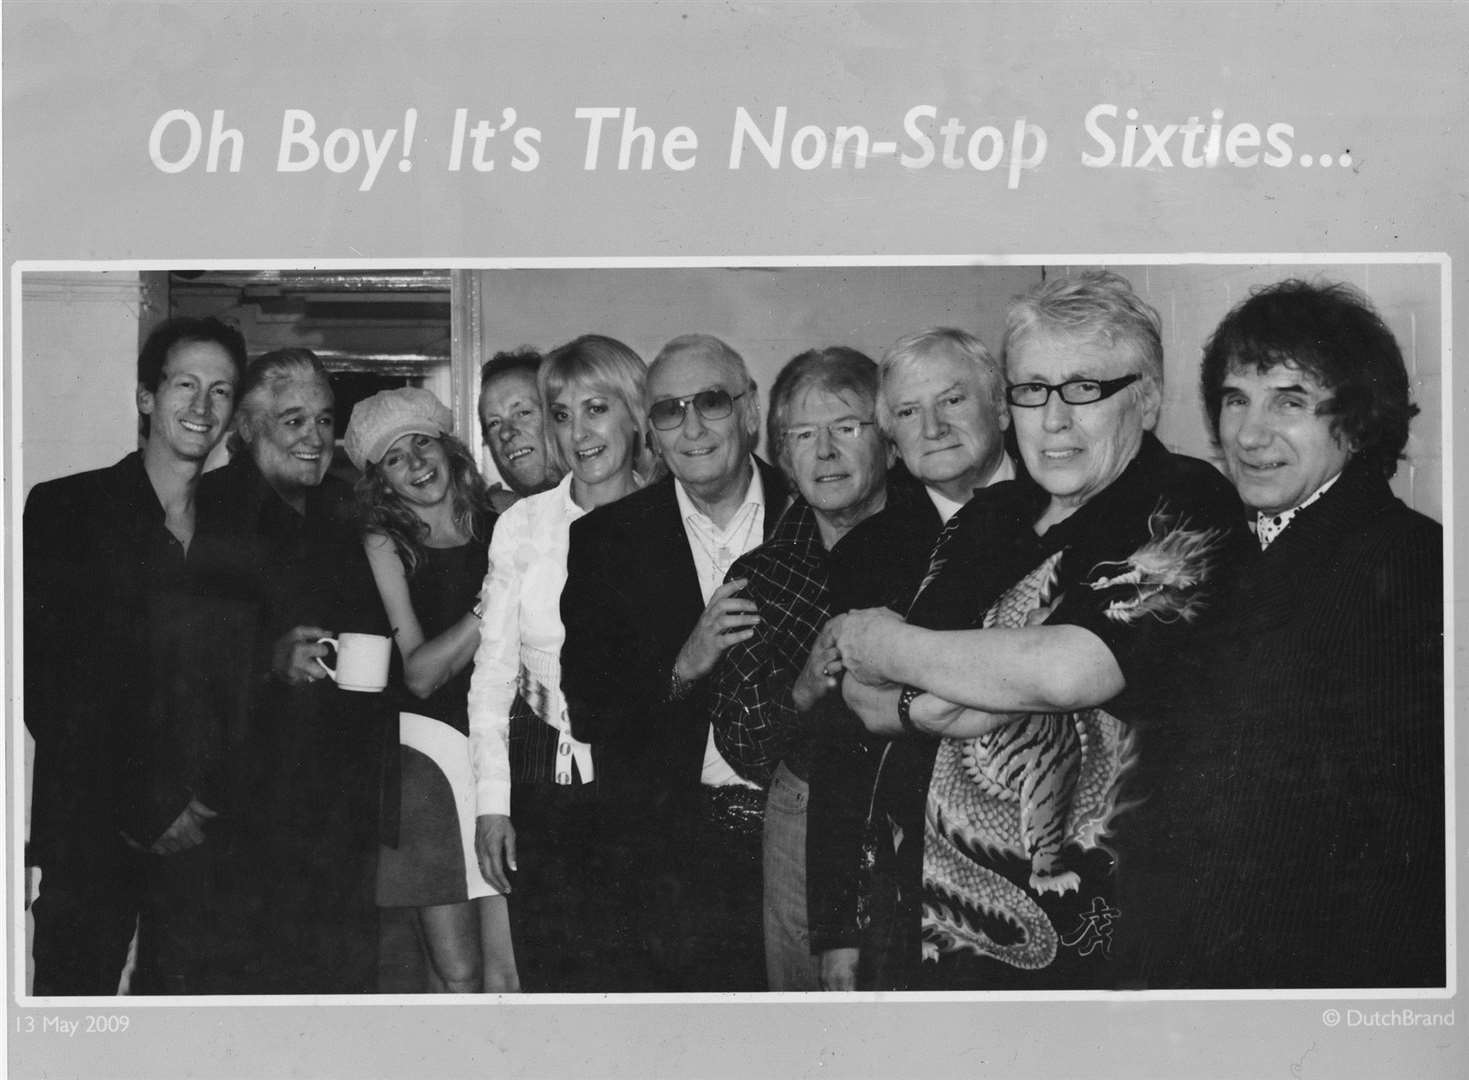 Mark Ellen, fourth from left, of Vaniity Fare on a Non-Stop 60s tour with PJ Proby, Brian Poole of the Tremeloes, Chris Farlowe and Mike Pender of The Searchers (44831888)